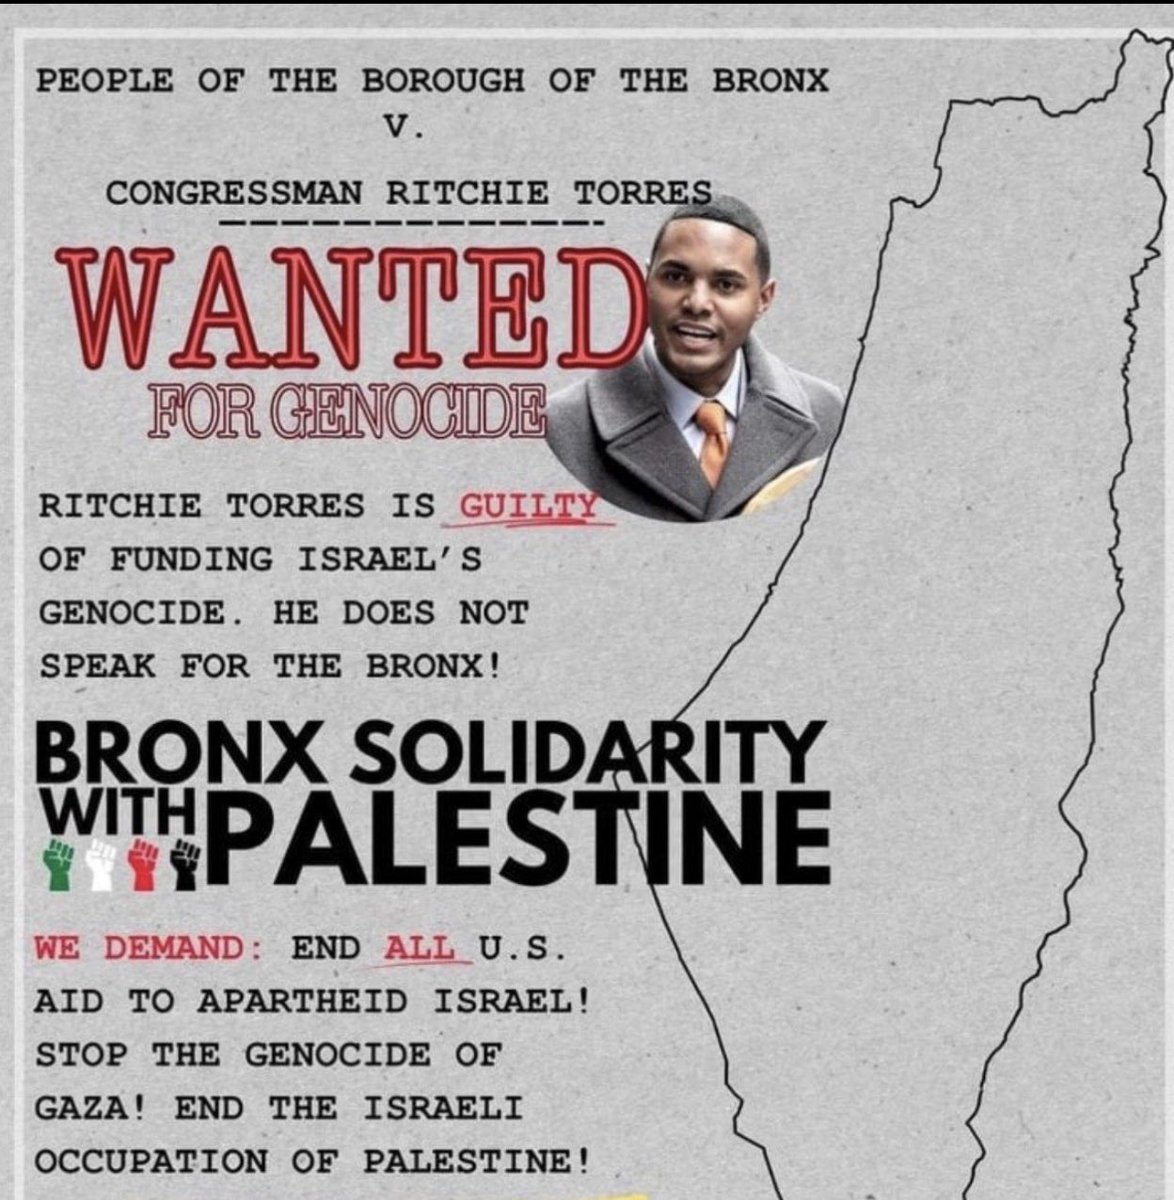 Anti-Israel extremists, largely pretending to be from the Bronx, are planning a protest, falsely accusing me of being “wanted for genocide.” I had a tough upbringing in the projects in the Bronx. I don’t scare easily. I won’t shy away from fighting for my Jewish constituents…